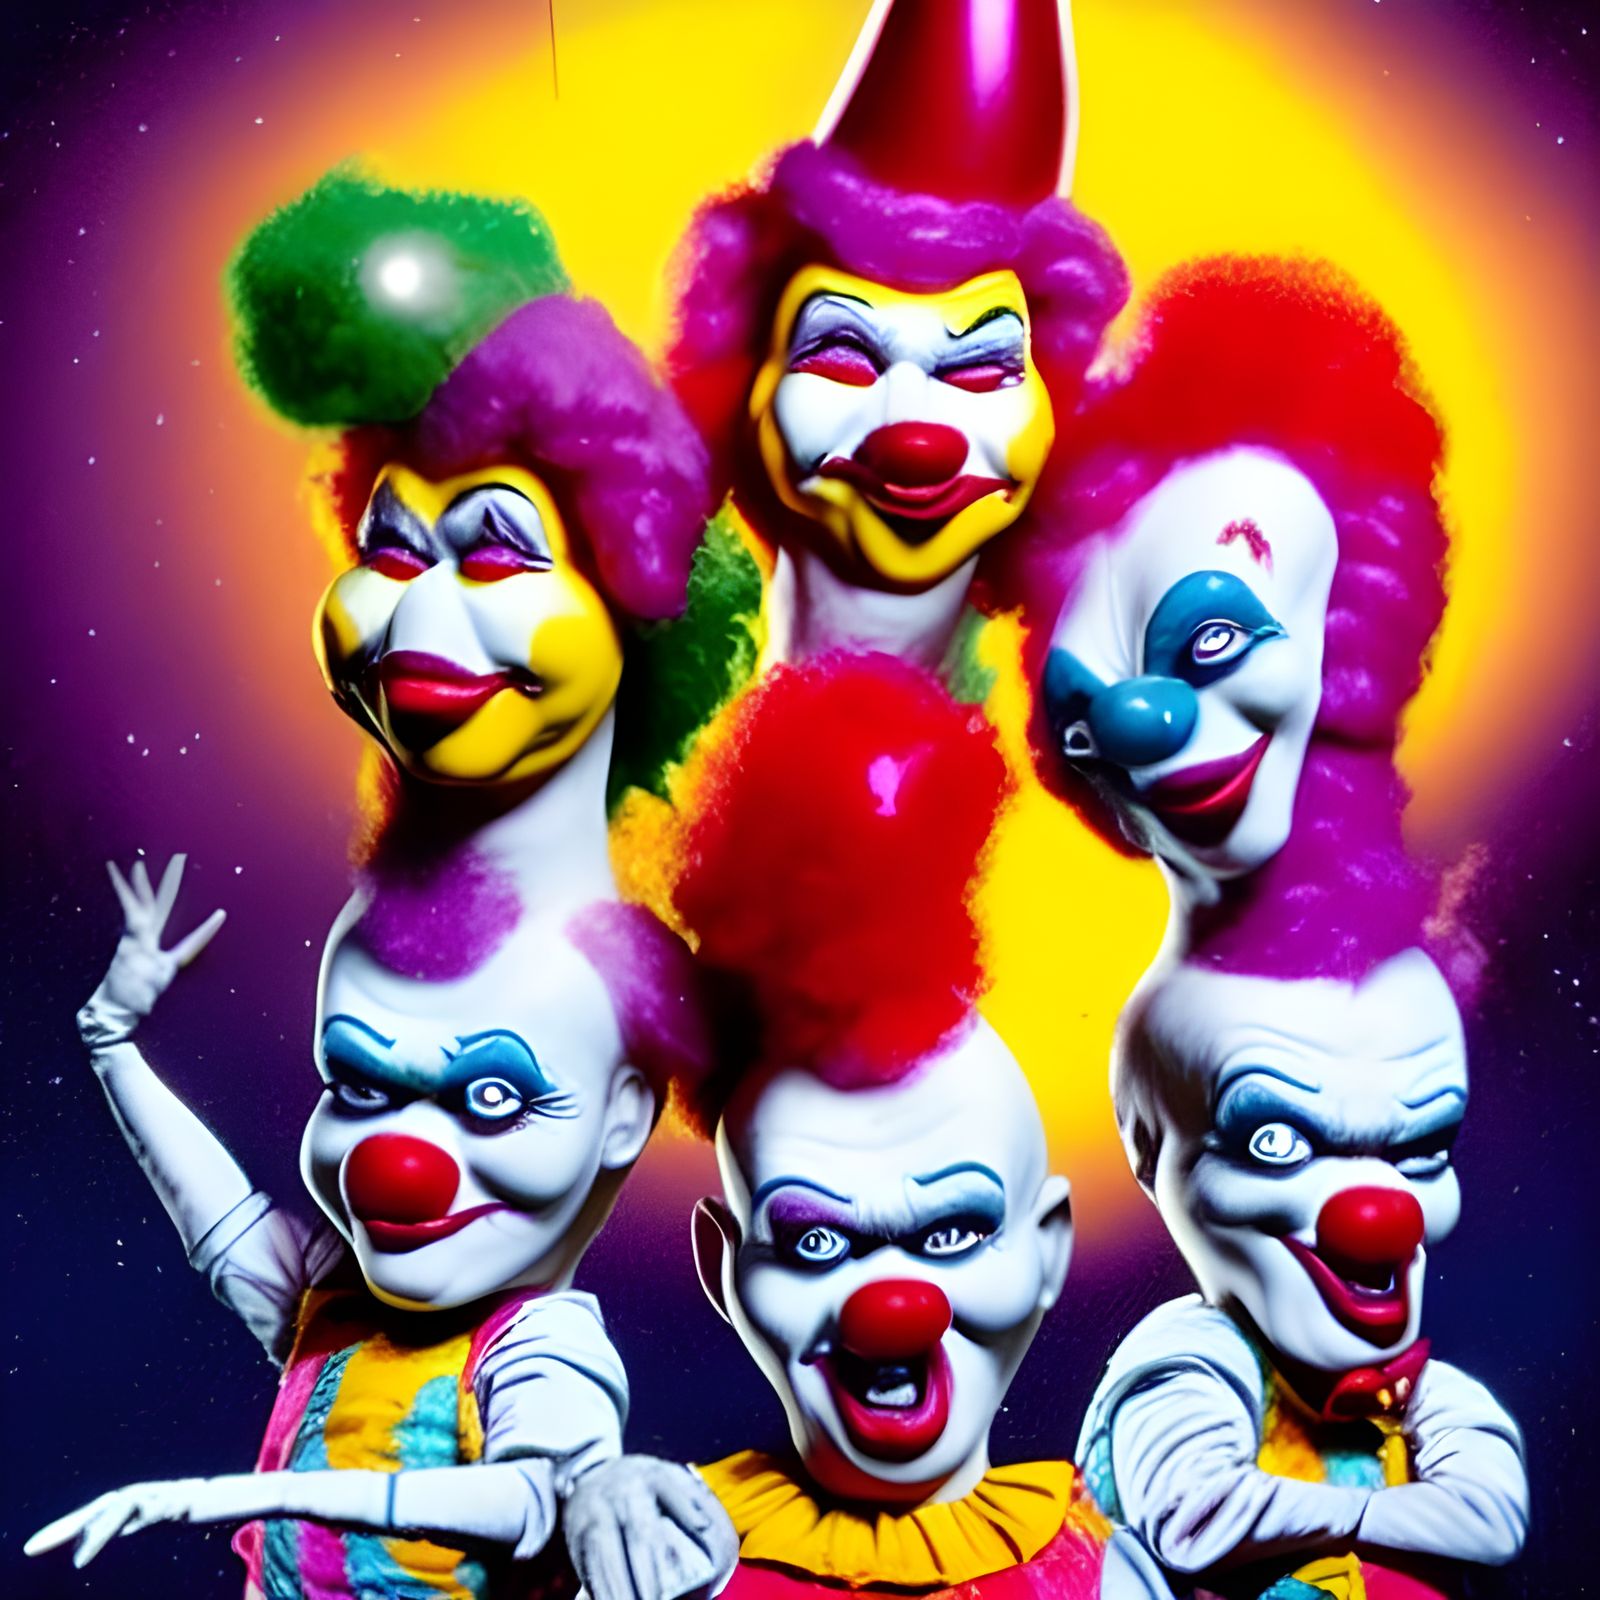 Killer klowns from outer space - AI Generated Artwork - NightCafe Creator